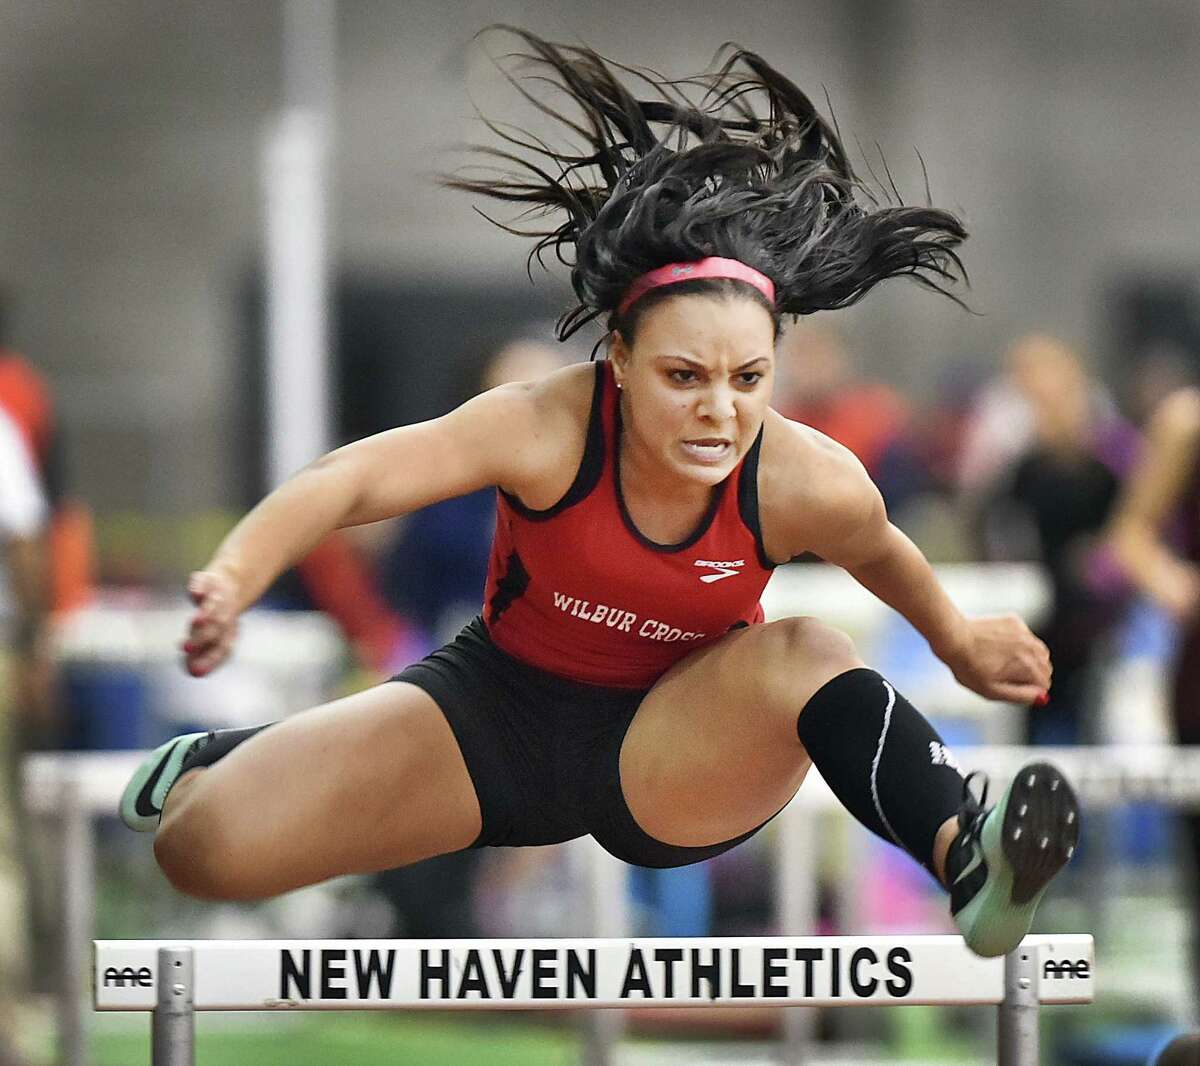 Wilbur Cross junior Gabby Curtis won the 55 meter hurdles in 8.48, at the CIAC Class L Indoor Track and Field Championships, Friday. Curtis and her teammates won the championship with 76 points, 20 points ahead of the Darien Blue Wave. (Catherine Avalone/New Haven Register)